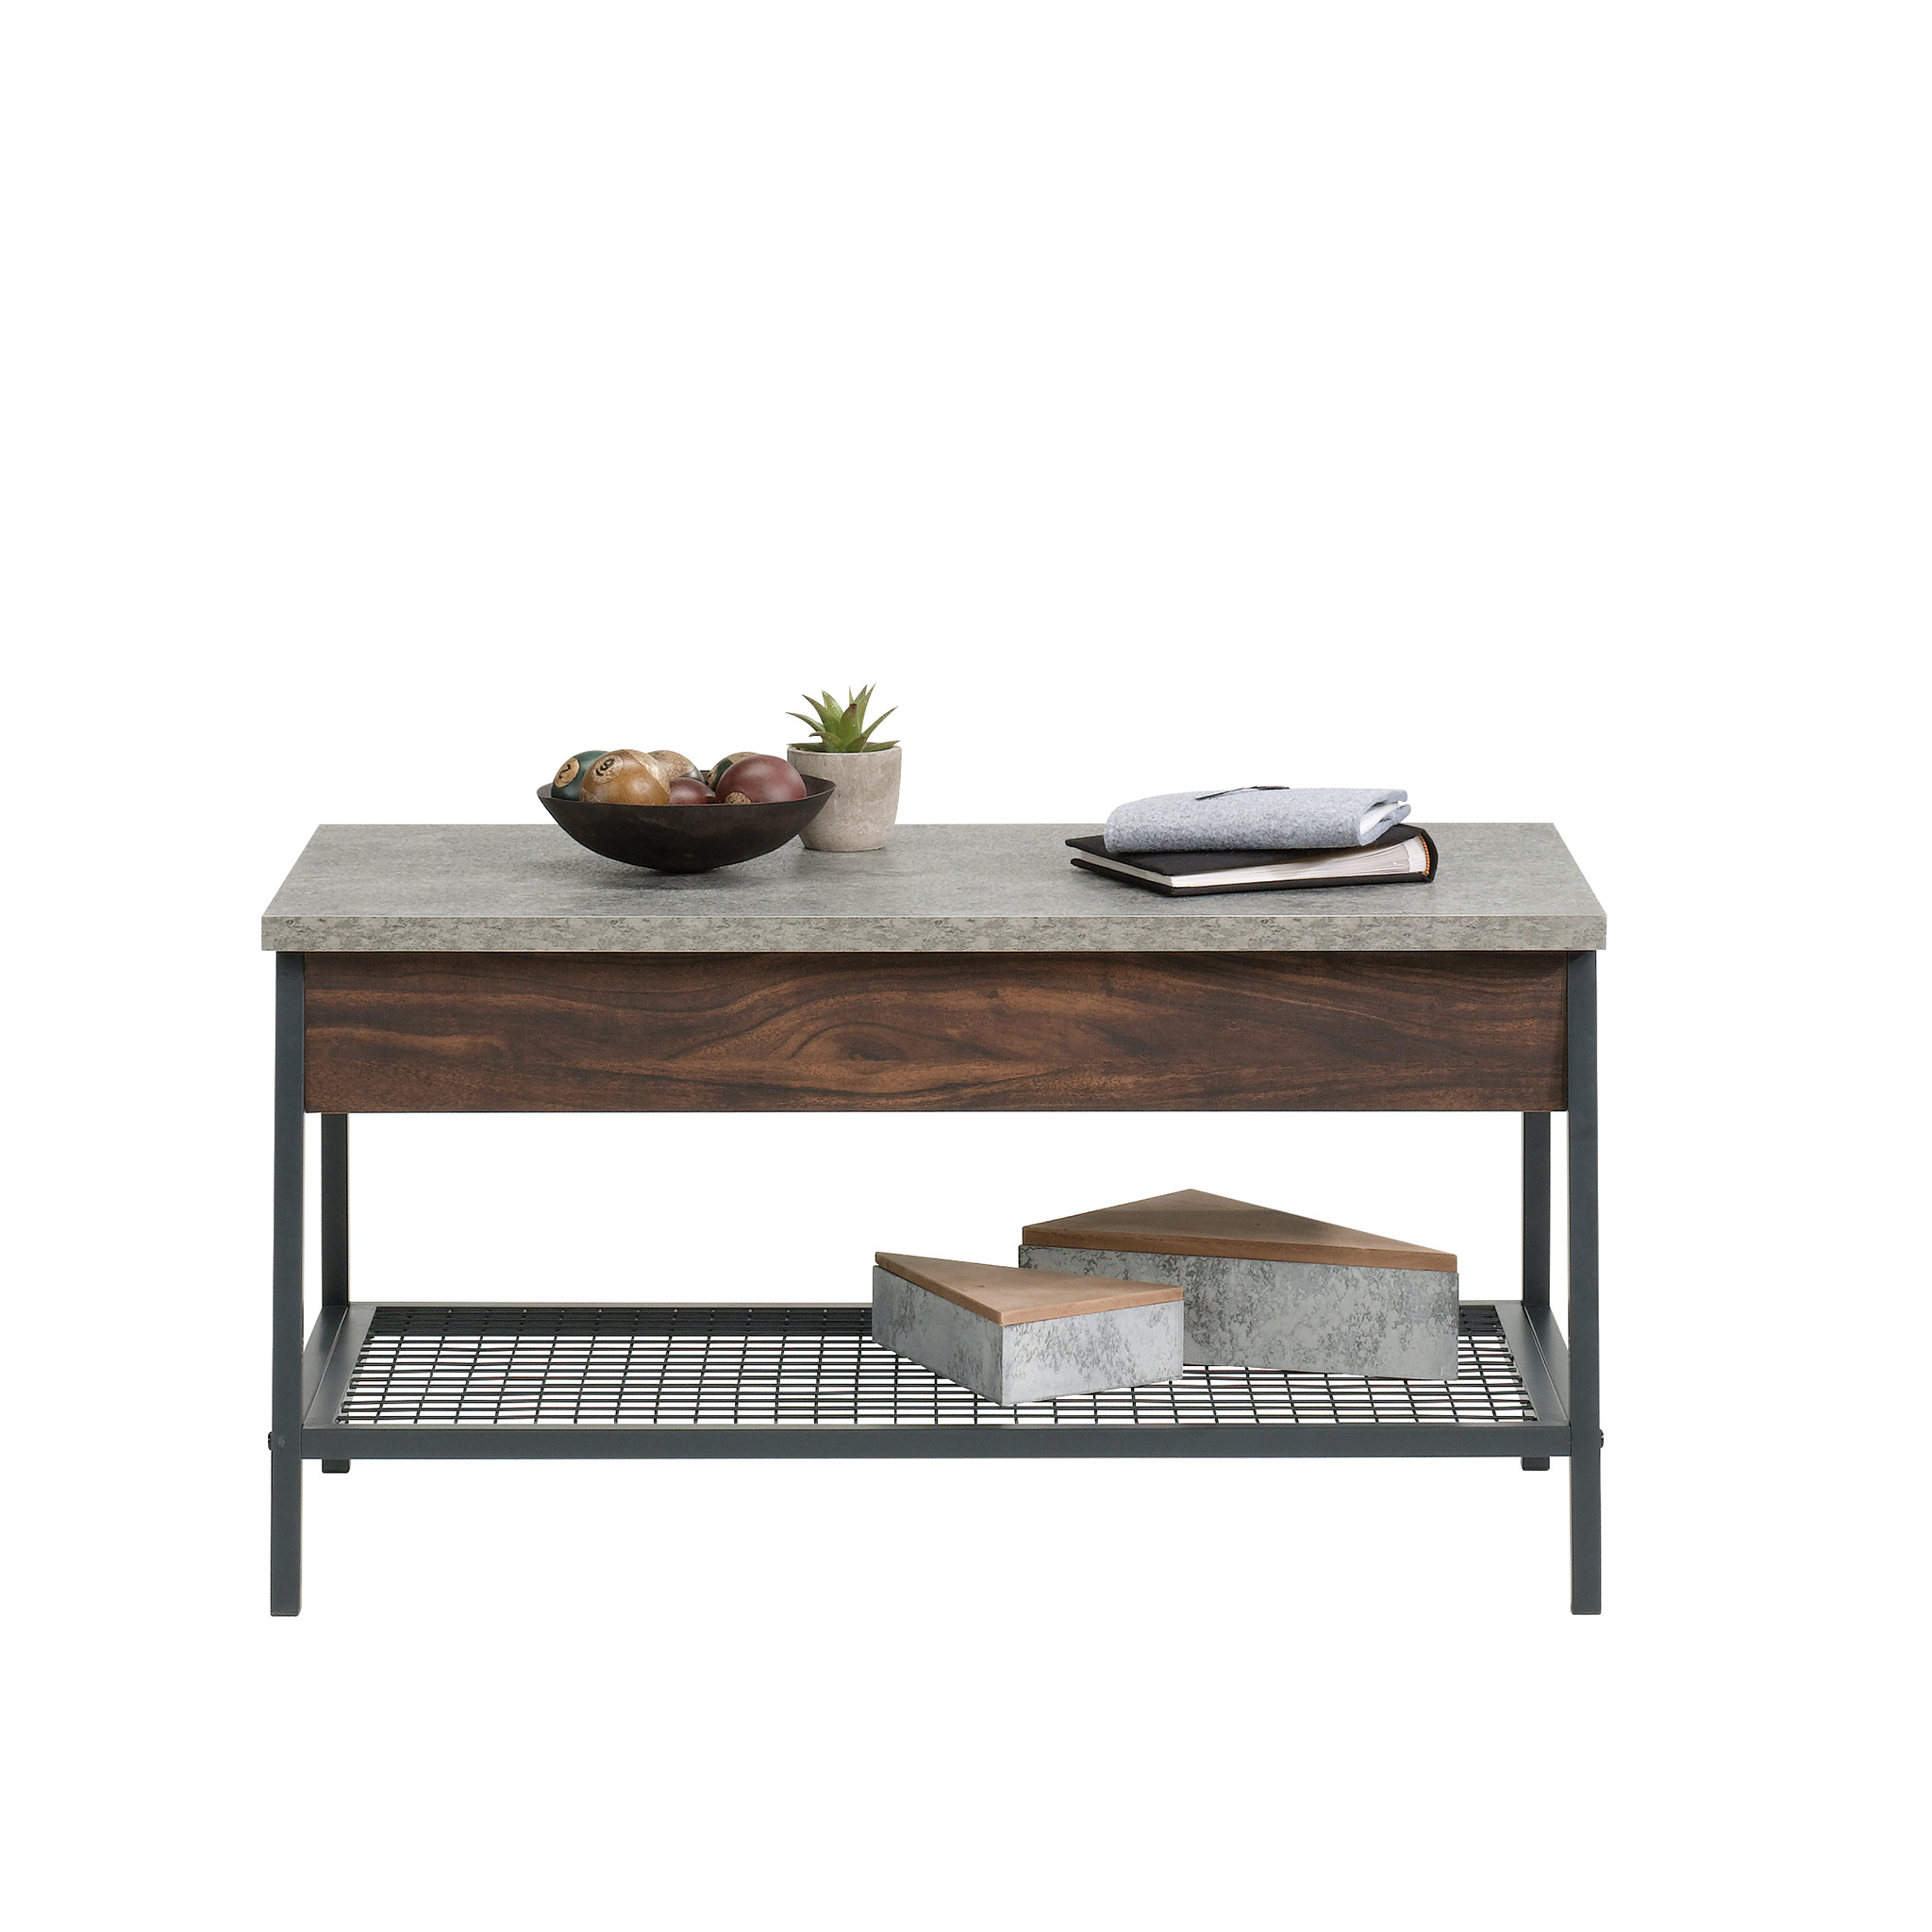 Sauder Market Commons Metal Coffee Table, Rich Walnut Finish - image 3 of 11